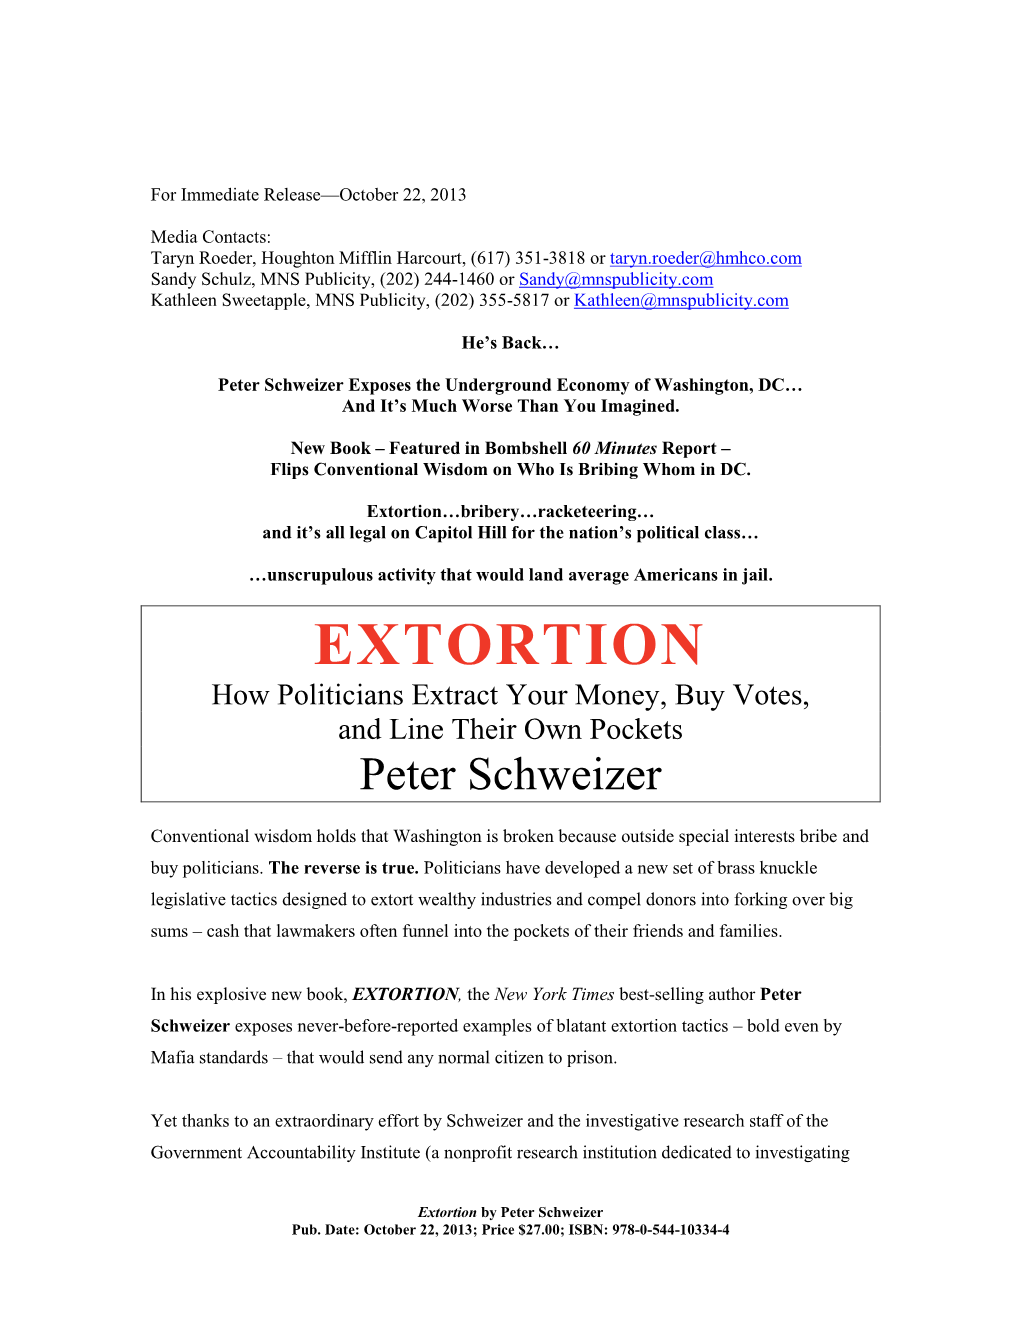 Extortion Press Release